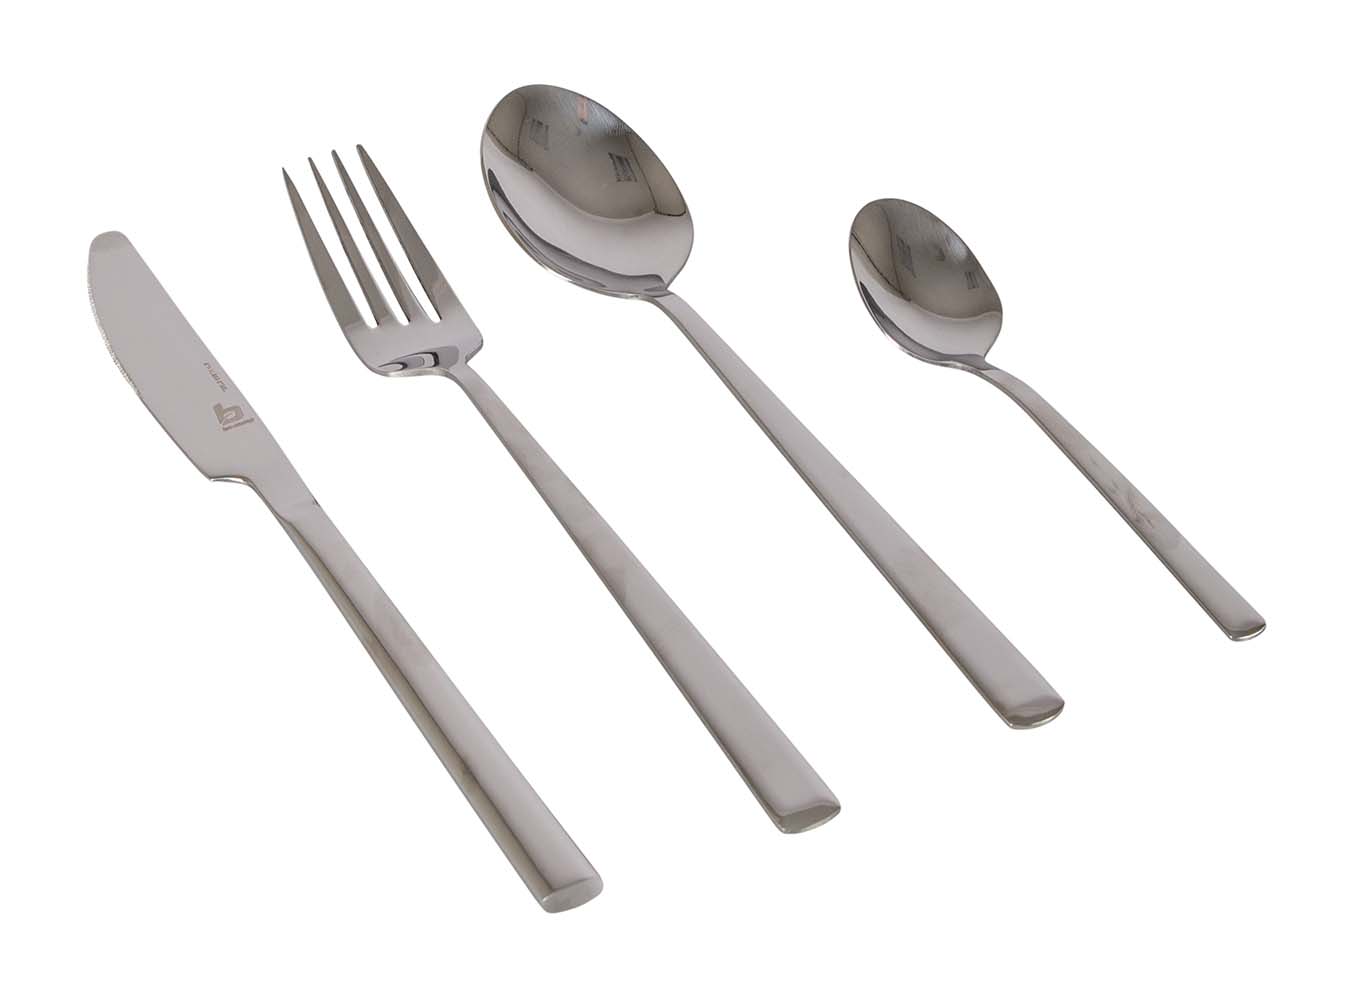 6102157 A stylish 16-piece set of cutlery suitable for 4 persons. Made of strong stainless steel and is dishwasher safe. In addition, the handle lies comfortably in the hand. Gives your set table an elegant look.